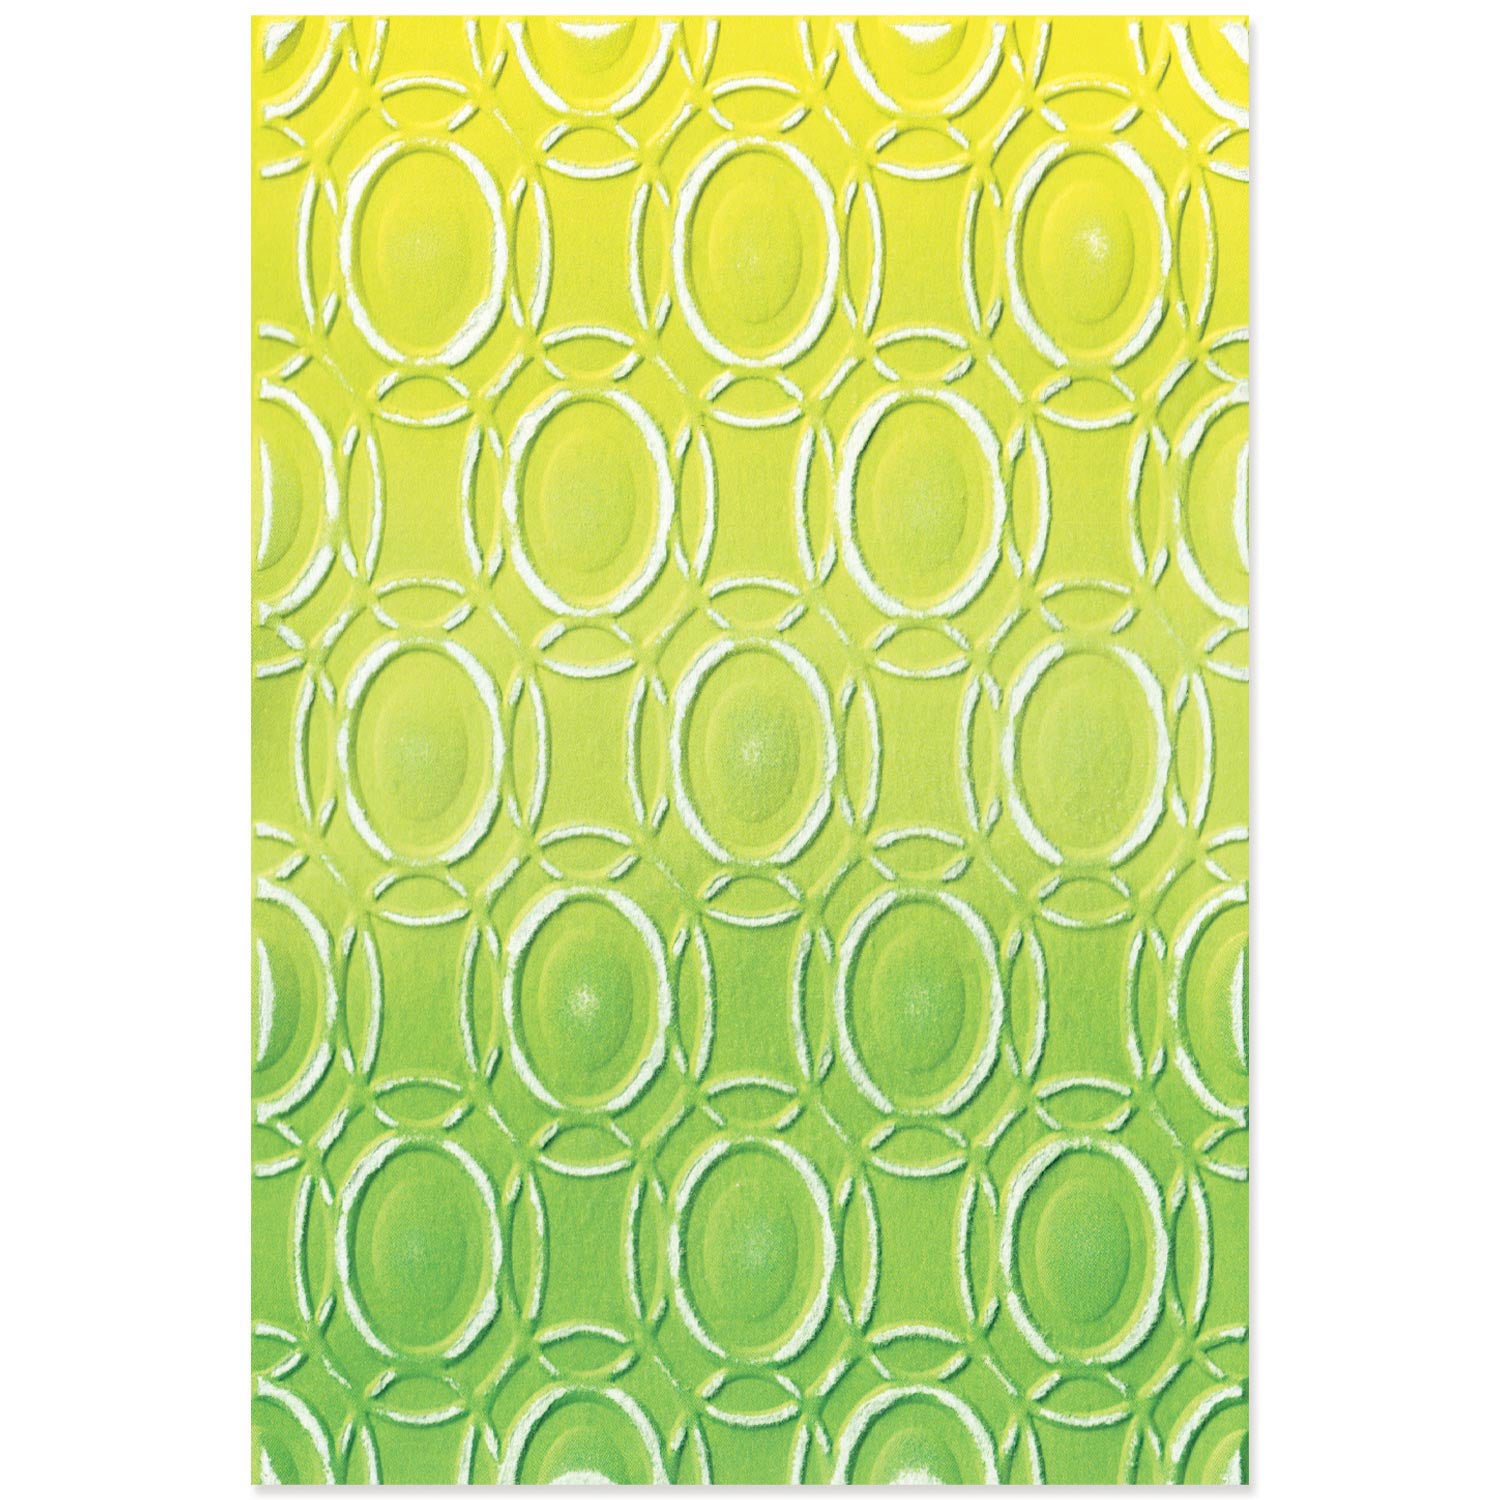 sizzix-3-d-textured-impressions-embossing-folder-cosmopolitan-golden-rings-by-stacey-park